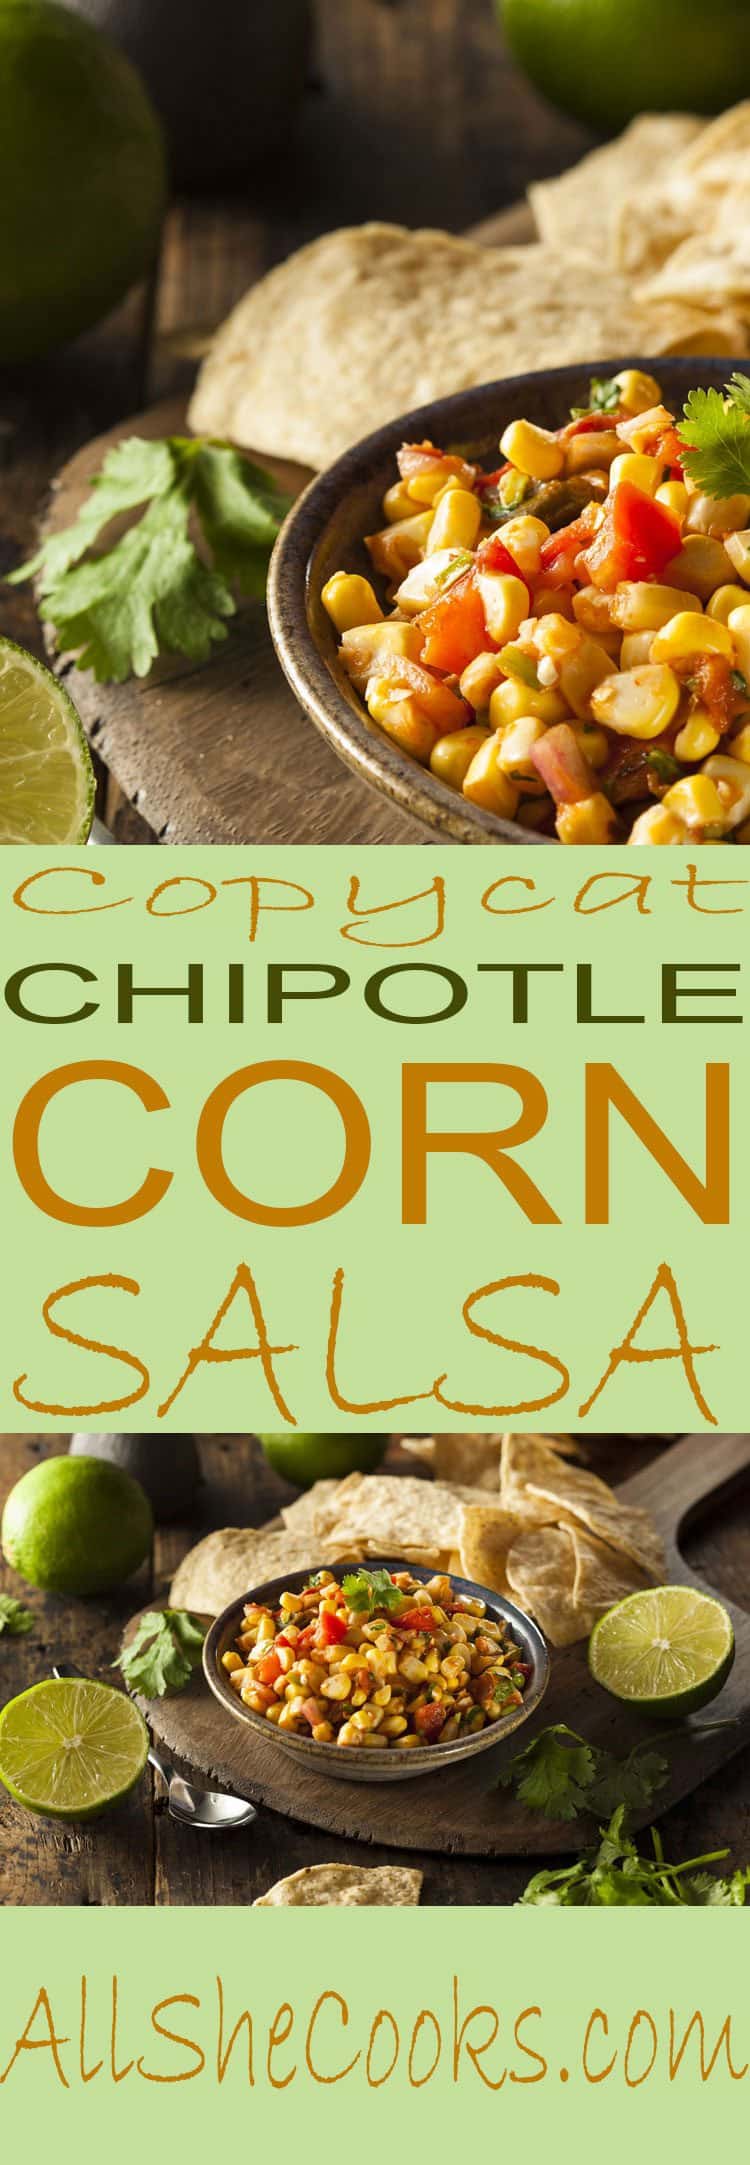 corn salsa and lime halves on rustic wood table background